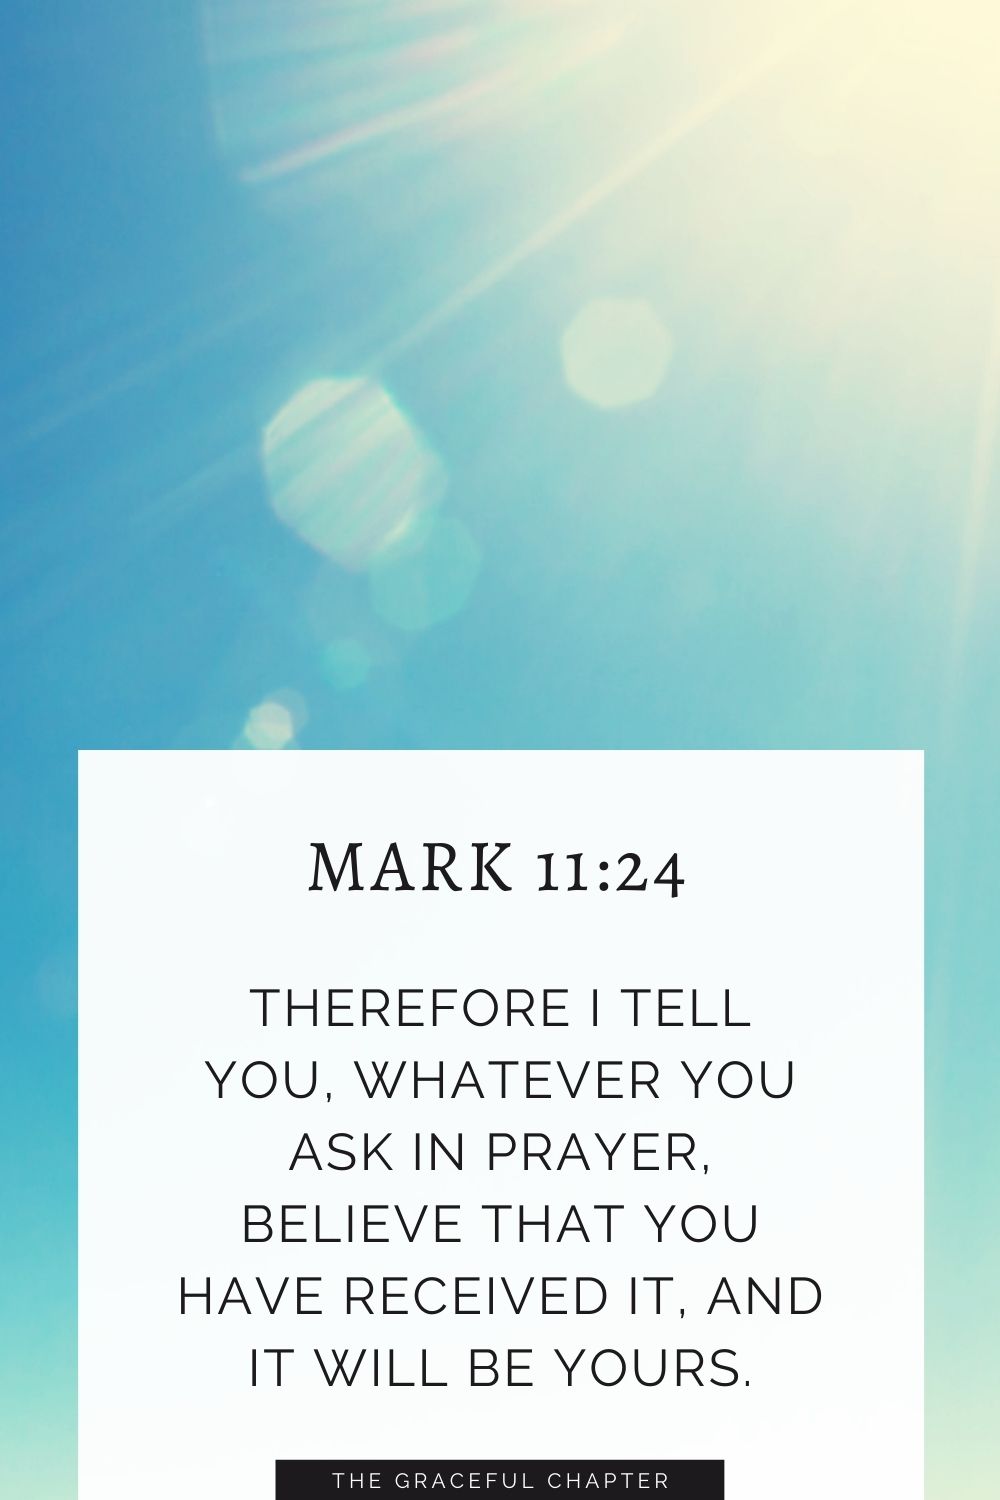 Therefore I tell you, whatever you ask in prayer, believe that you have received it, and it will be yours. Mark 11:24